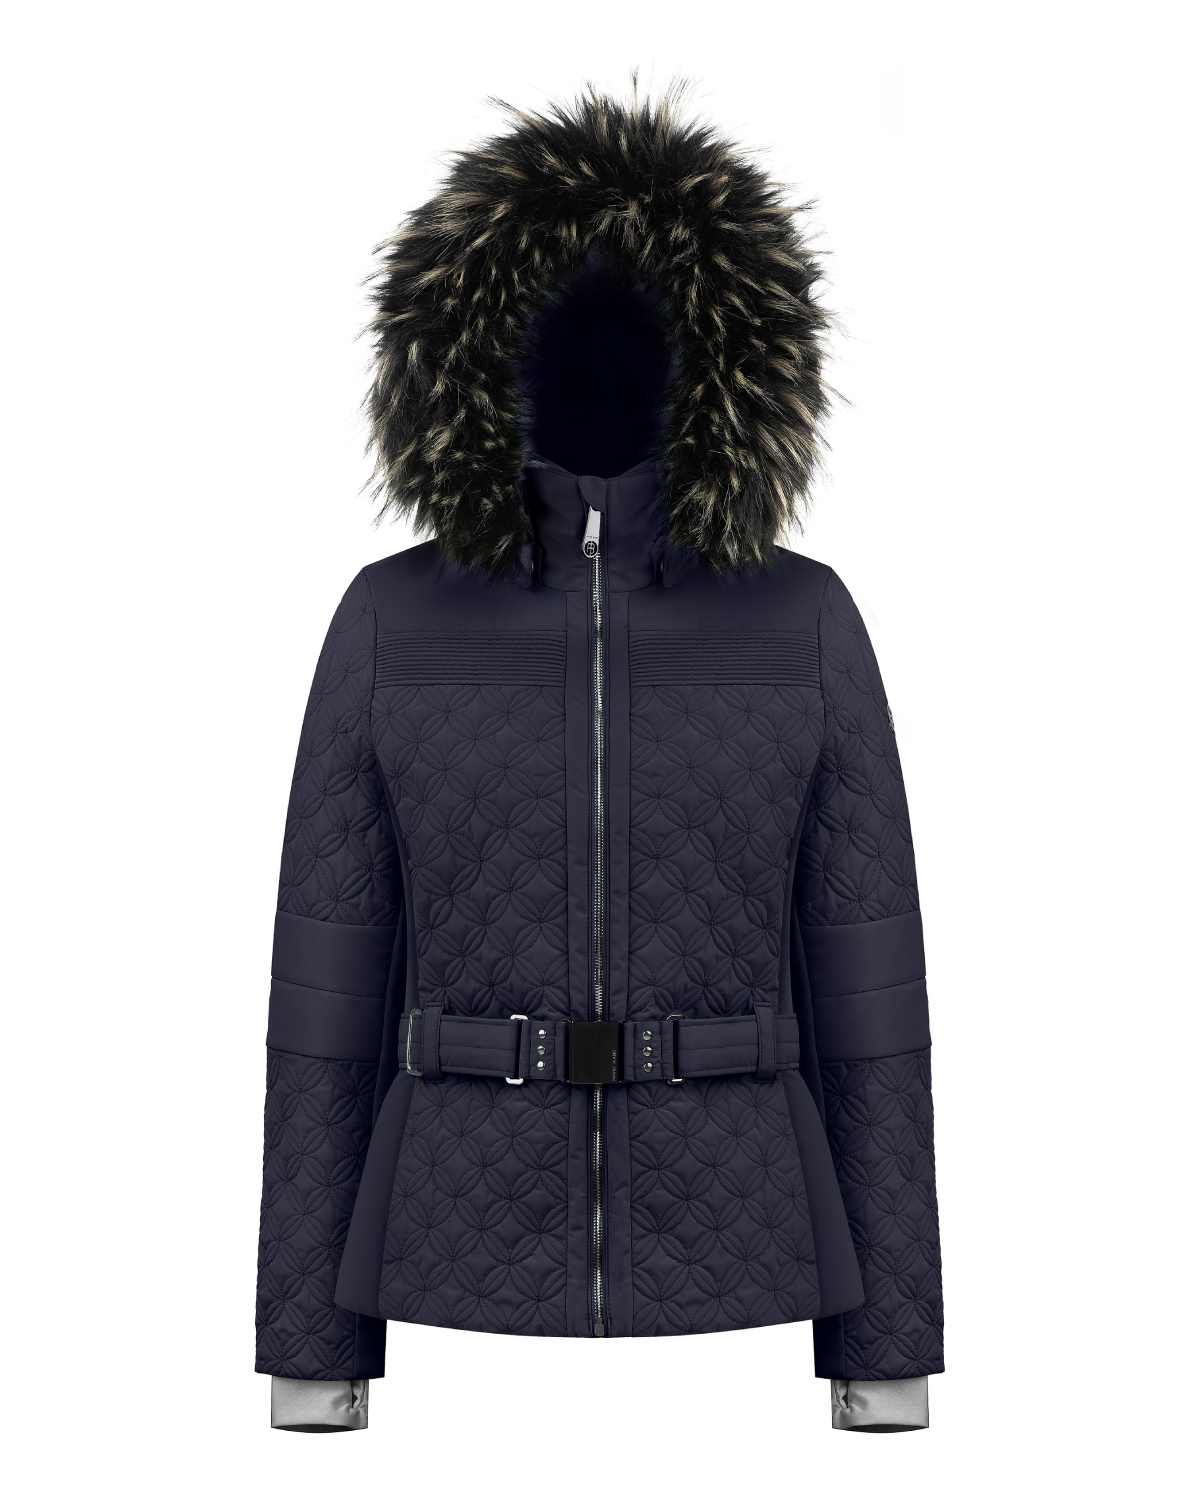 Poivre Blanc Women's Quilted Jacket in Navy Blue